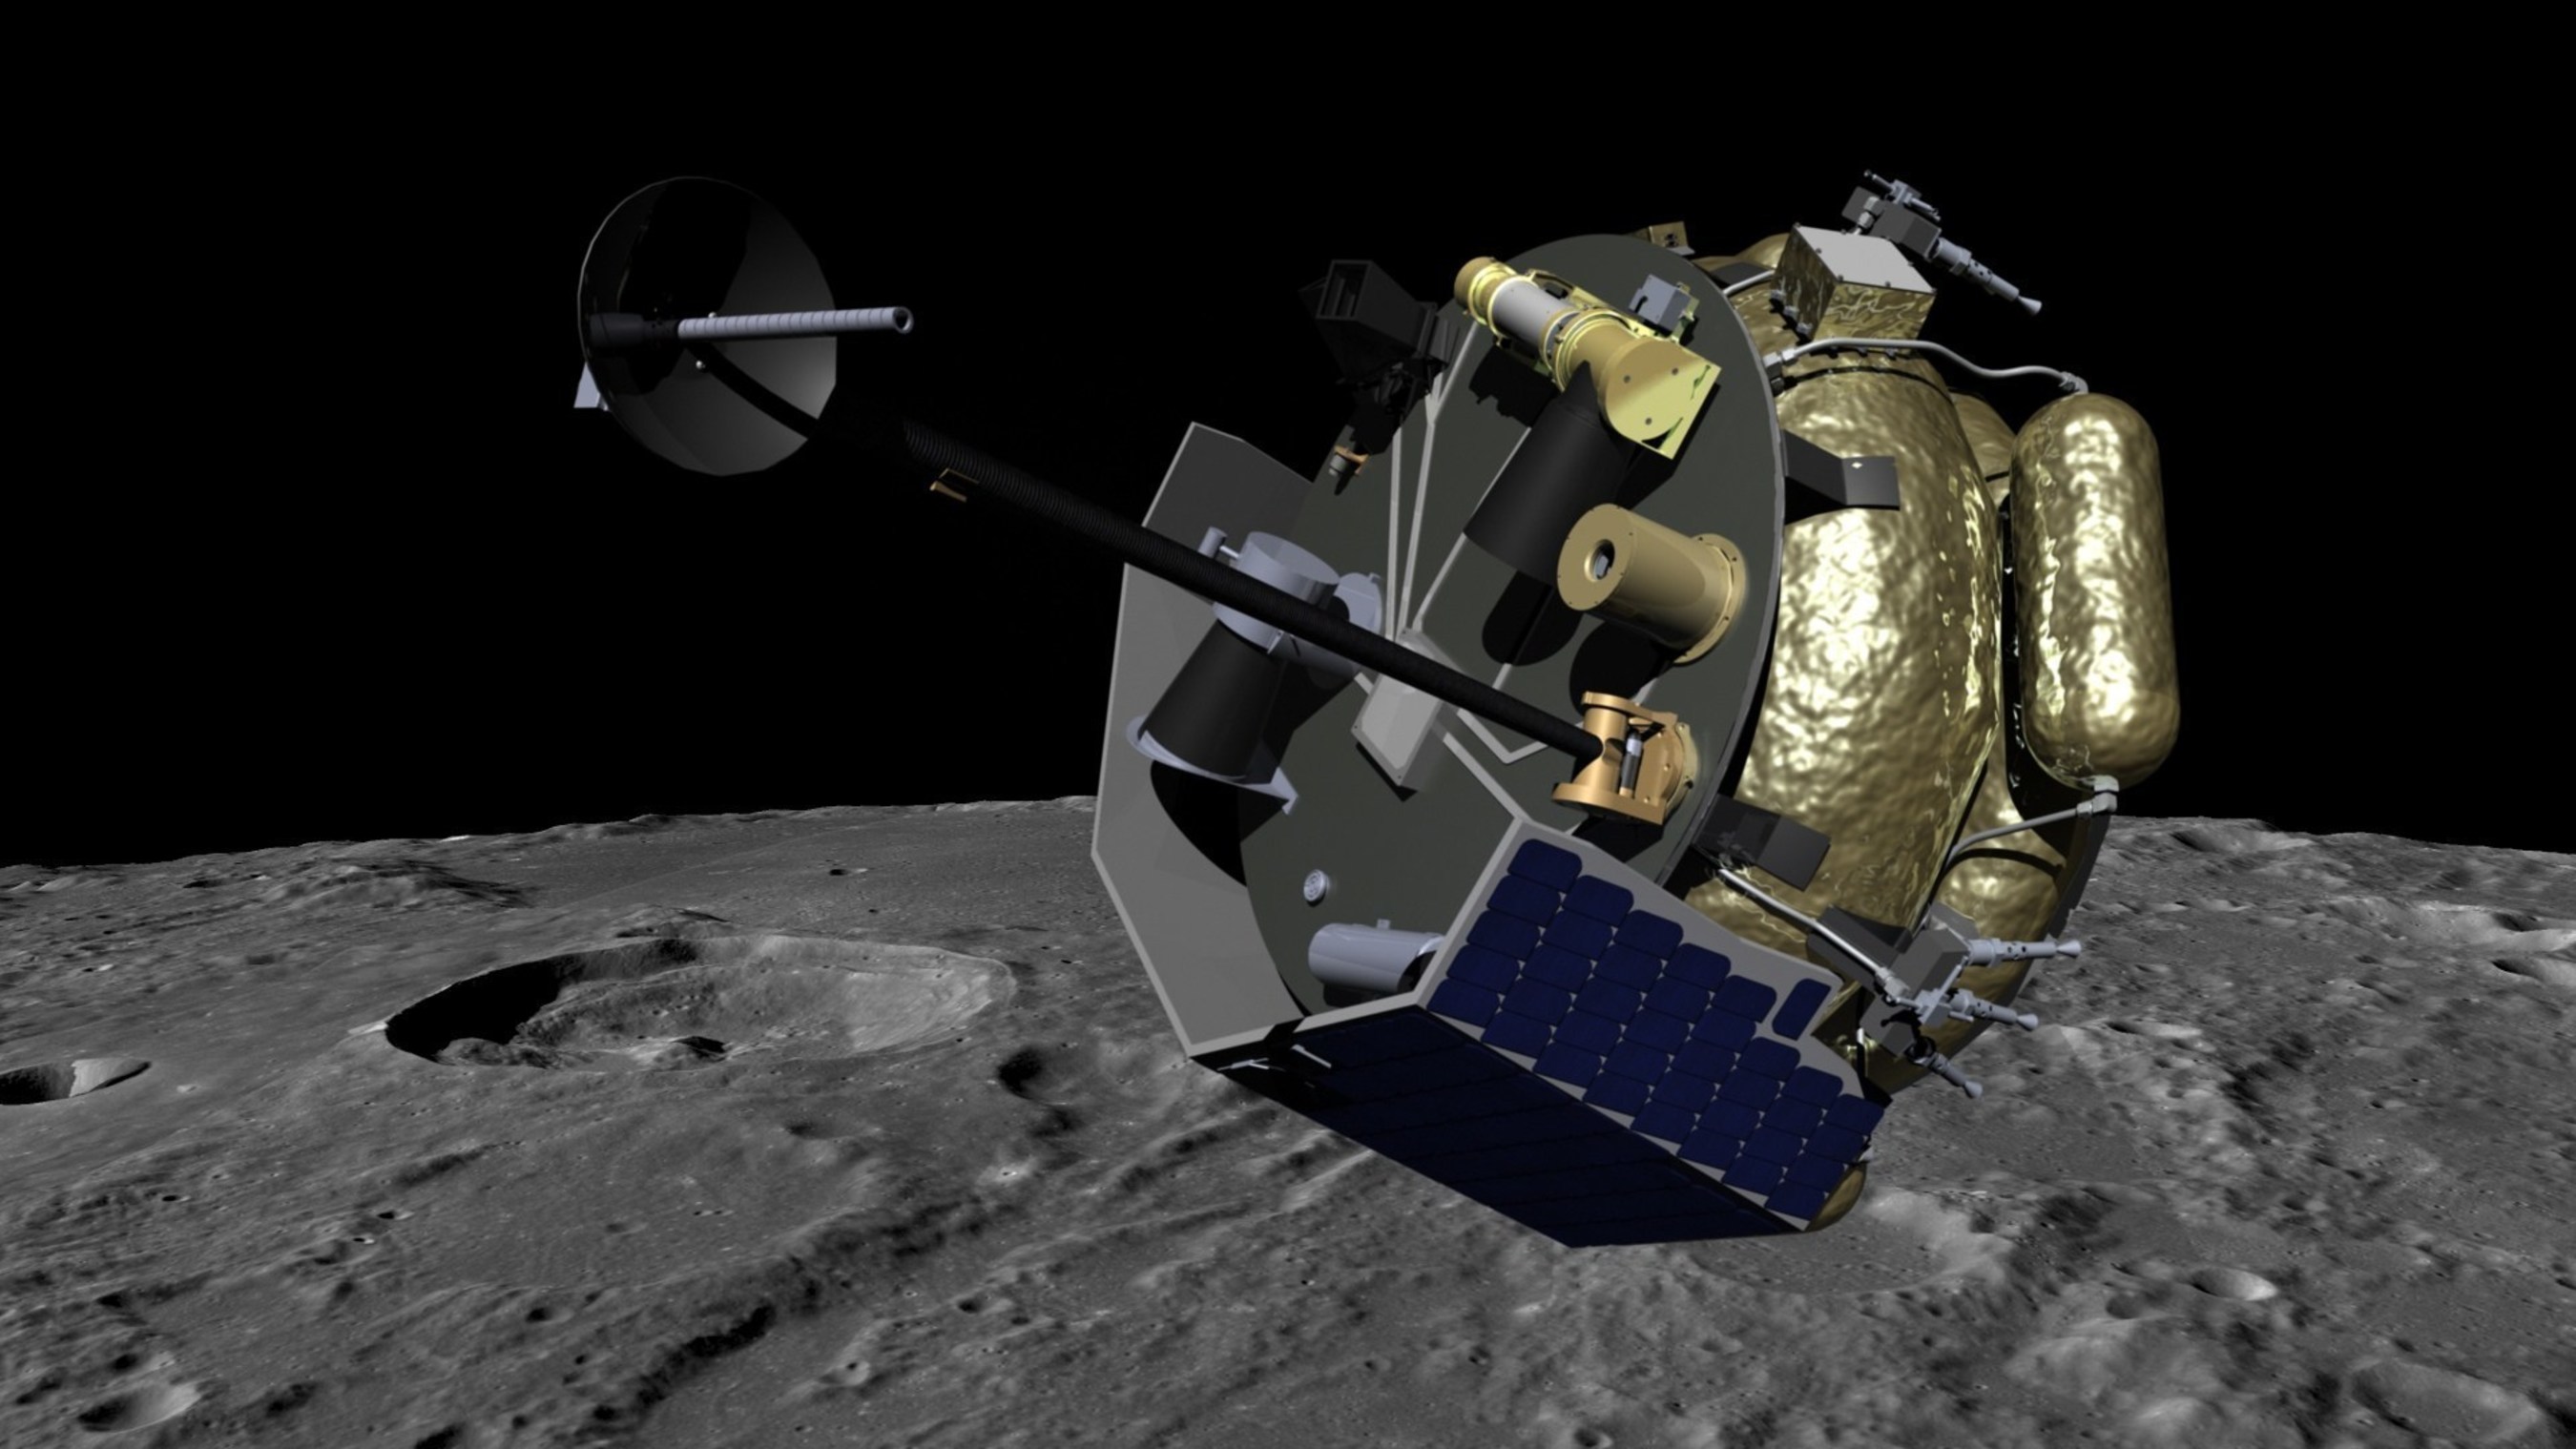 Moon Express MX-1 spacecraft orbits the Moon in preparation for landing. MX-1 will deliver commercial, academic and government instruments to explore the Moon for science and resources.